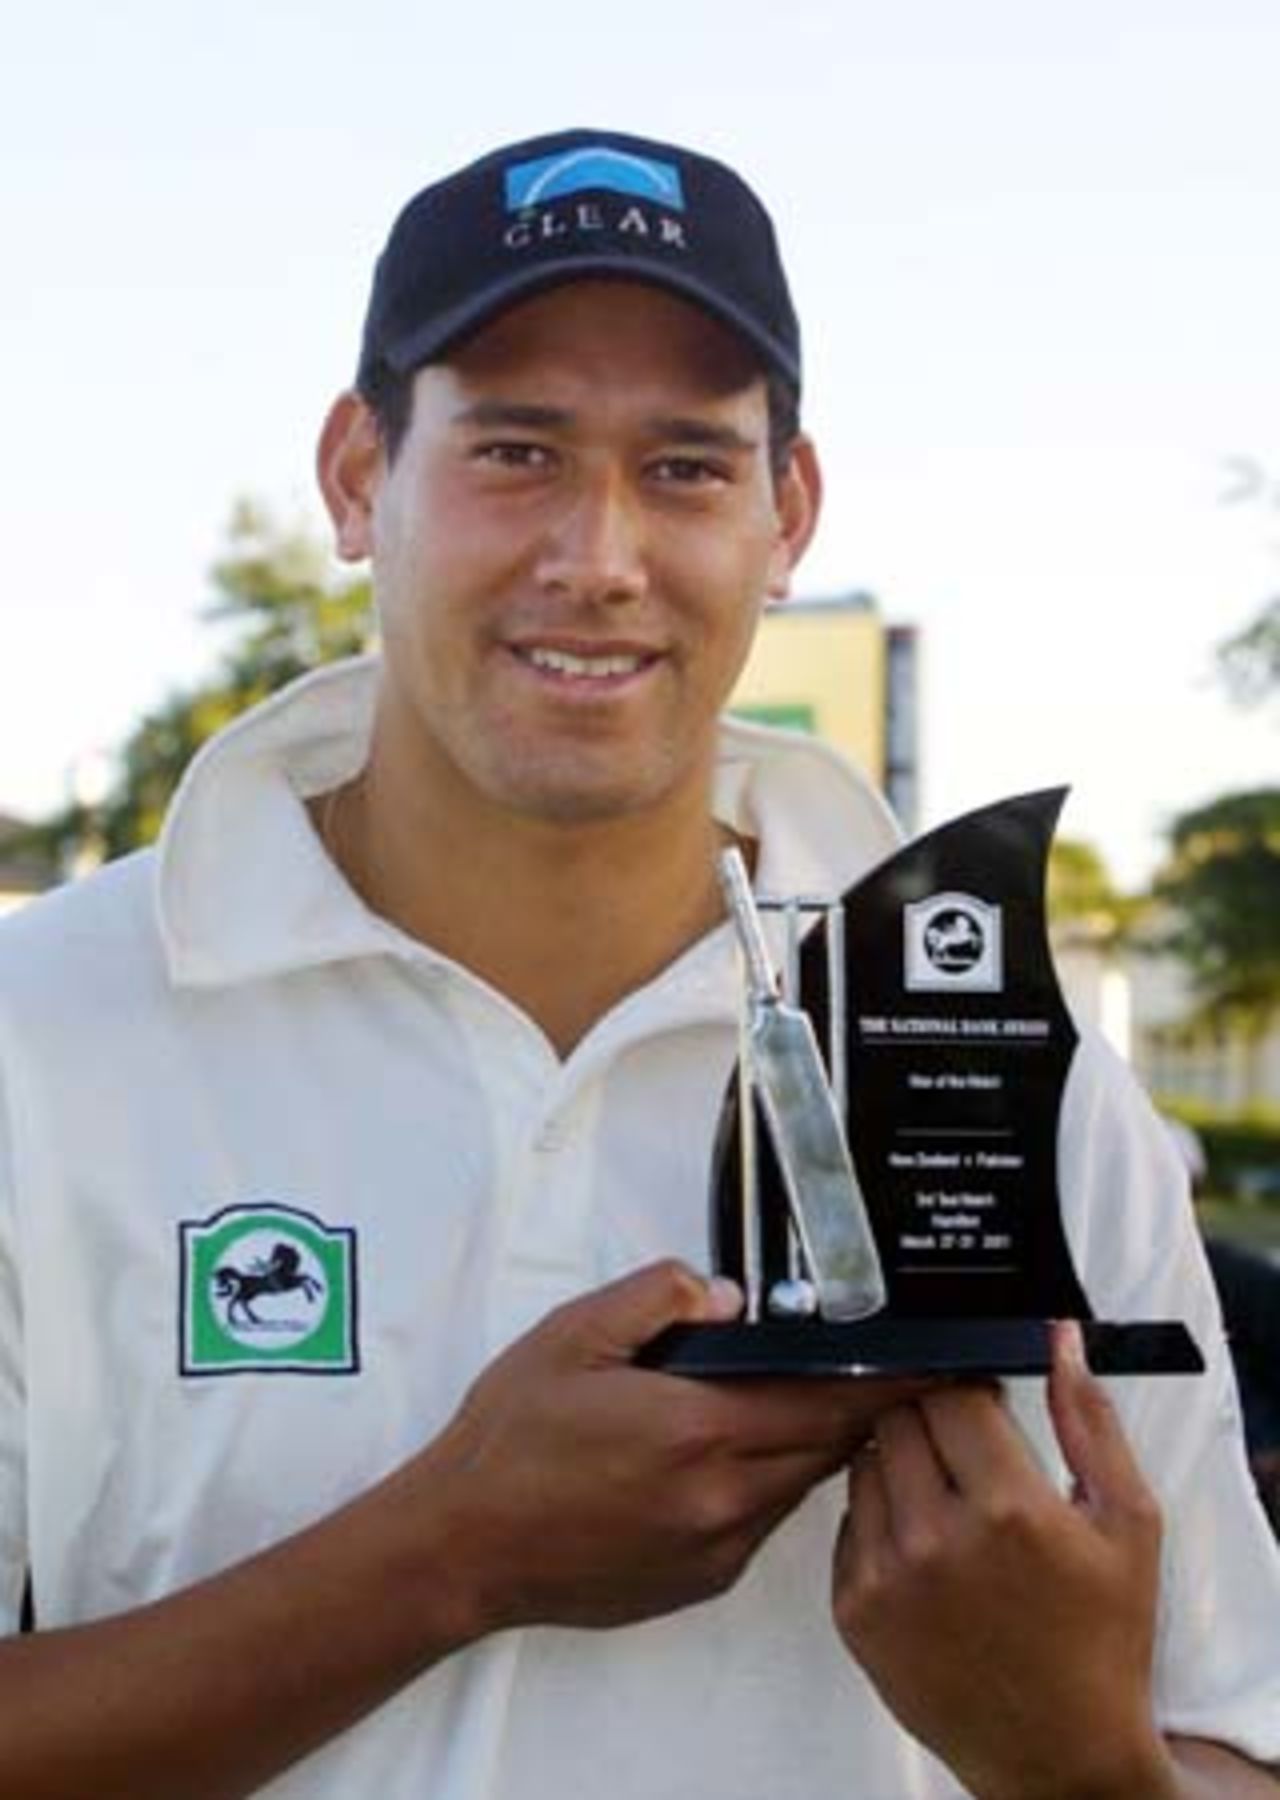 New Zealand fast medium bowler Daryl Tuffey holds the National Bank Player of the Match award after taking a match haul of 7-77 from 29.5 overs. 3rd Test: New Zealand v Pakistan at WestpacTrust Park, Hamilton, 27-31 March 2001 (Day 4).